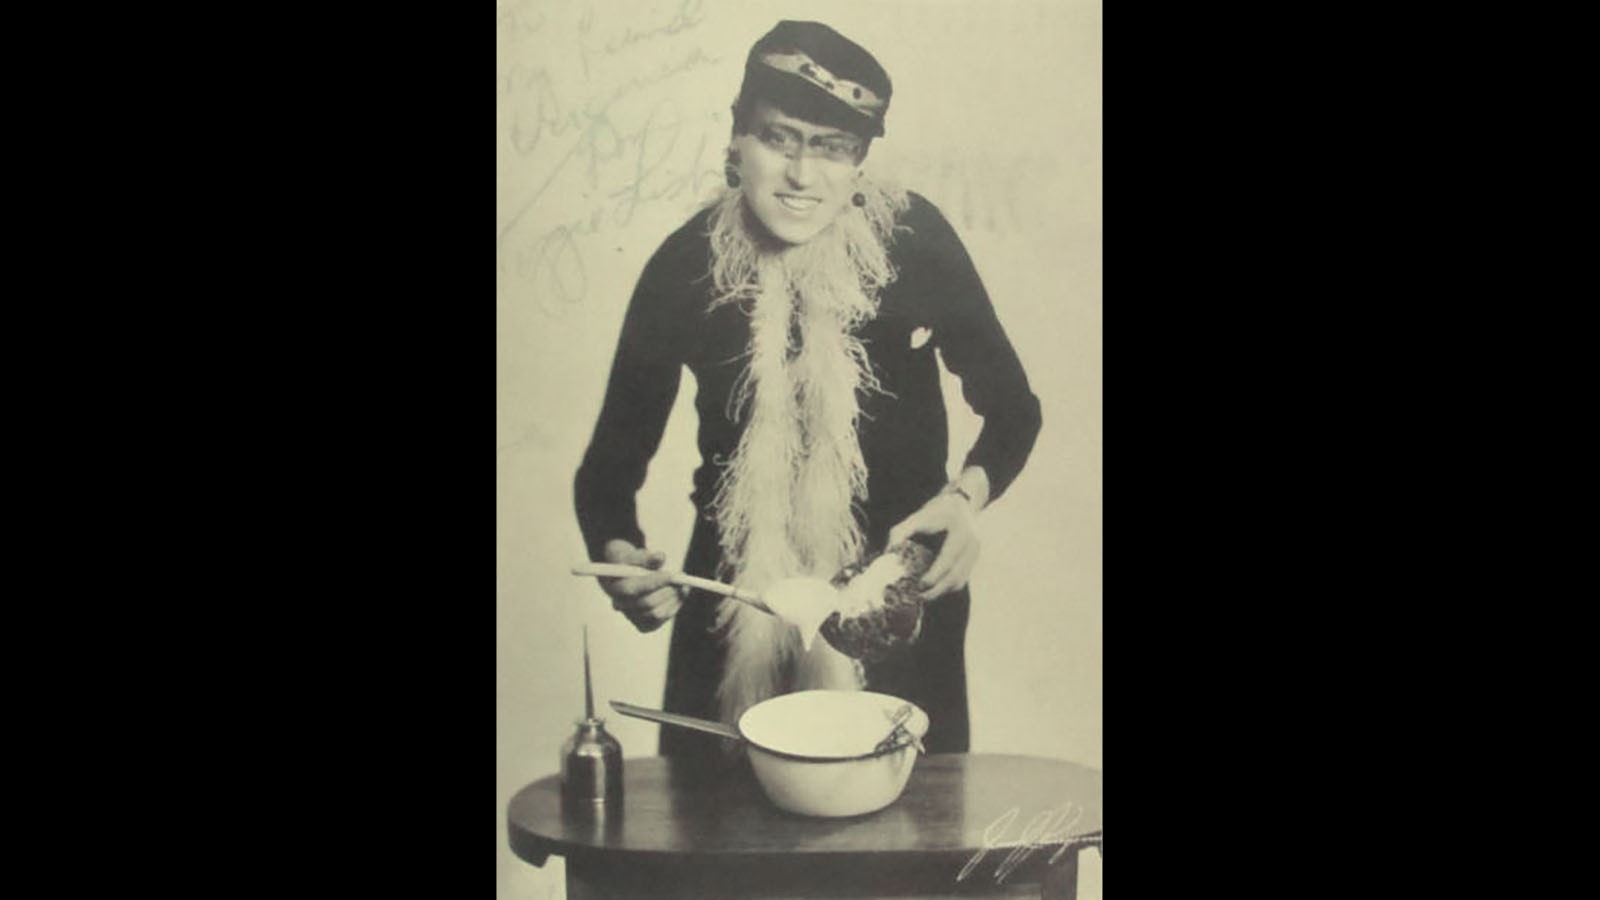 Tizzie Lish was the stage persona of a popular 1930s and 1940s commedian and actor named Bill Comstock. He'd give bad advice and cook disgusting recipes while talking in an exaggerated falsetto.